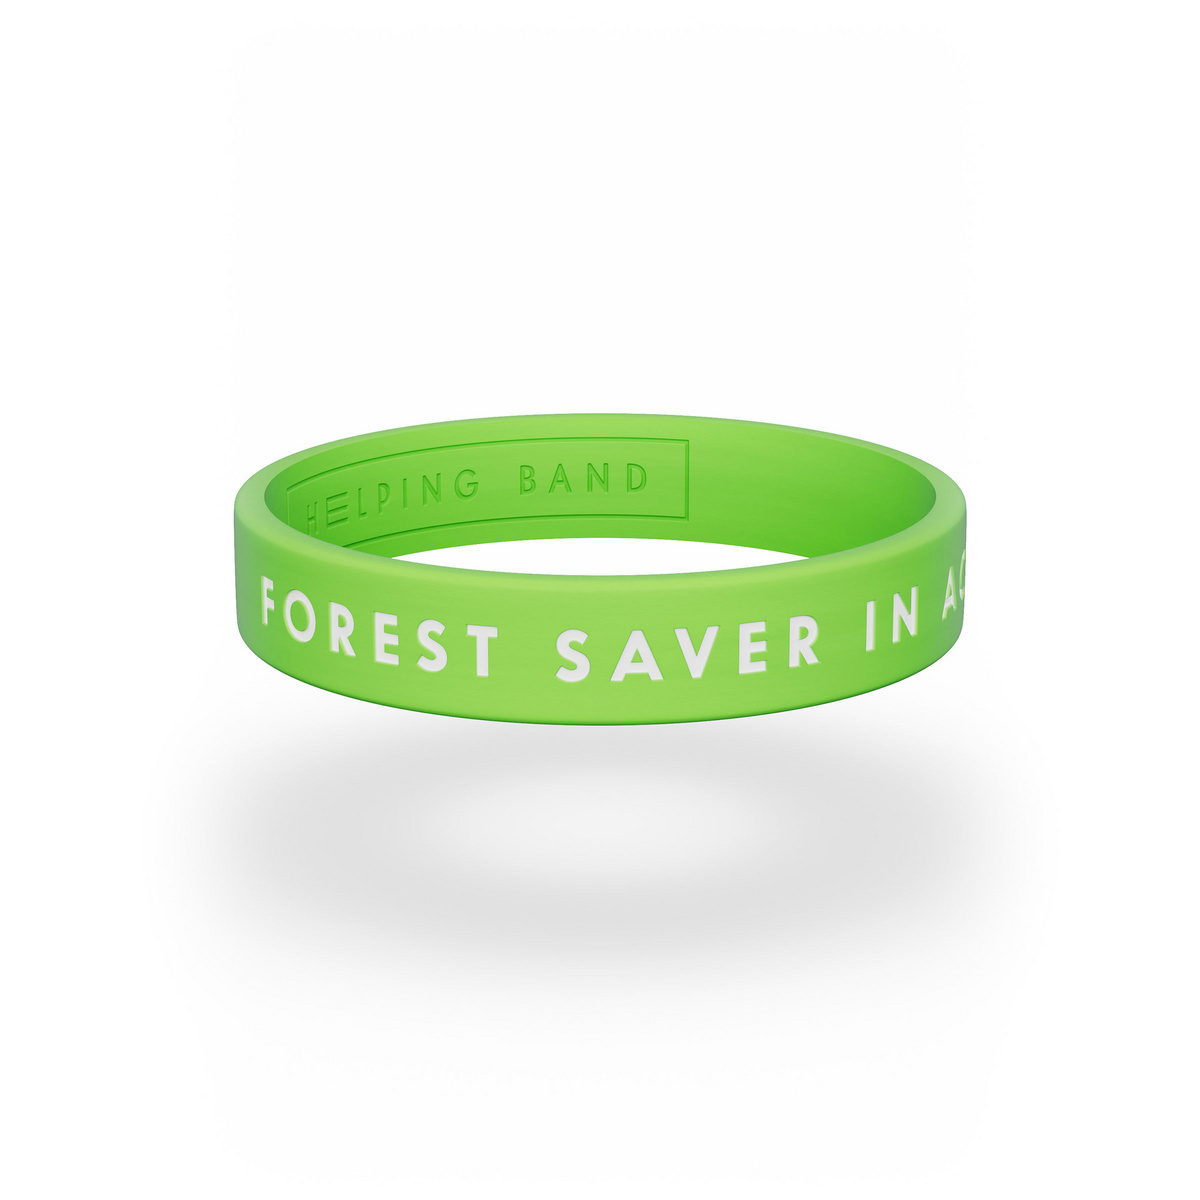 Helping Band Forest Saver in Action Armband